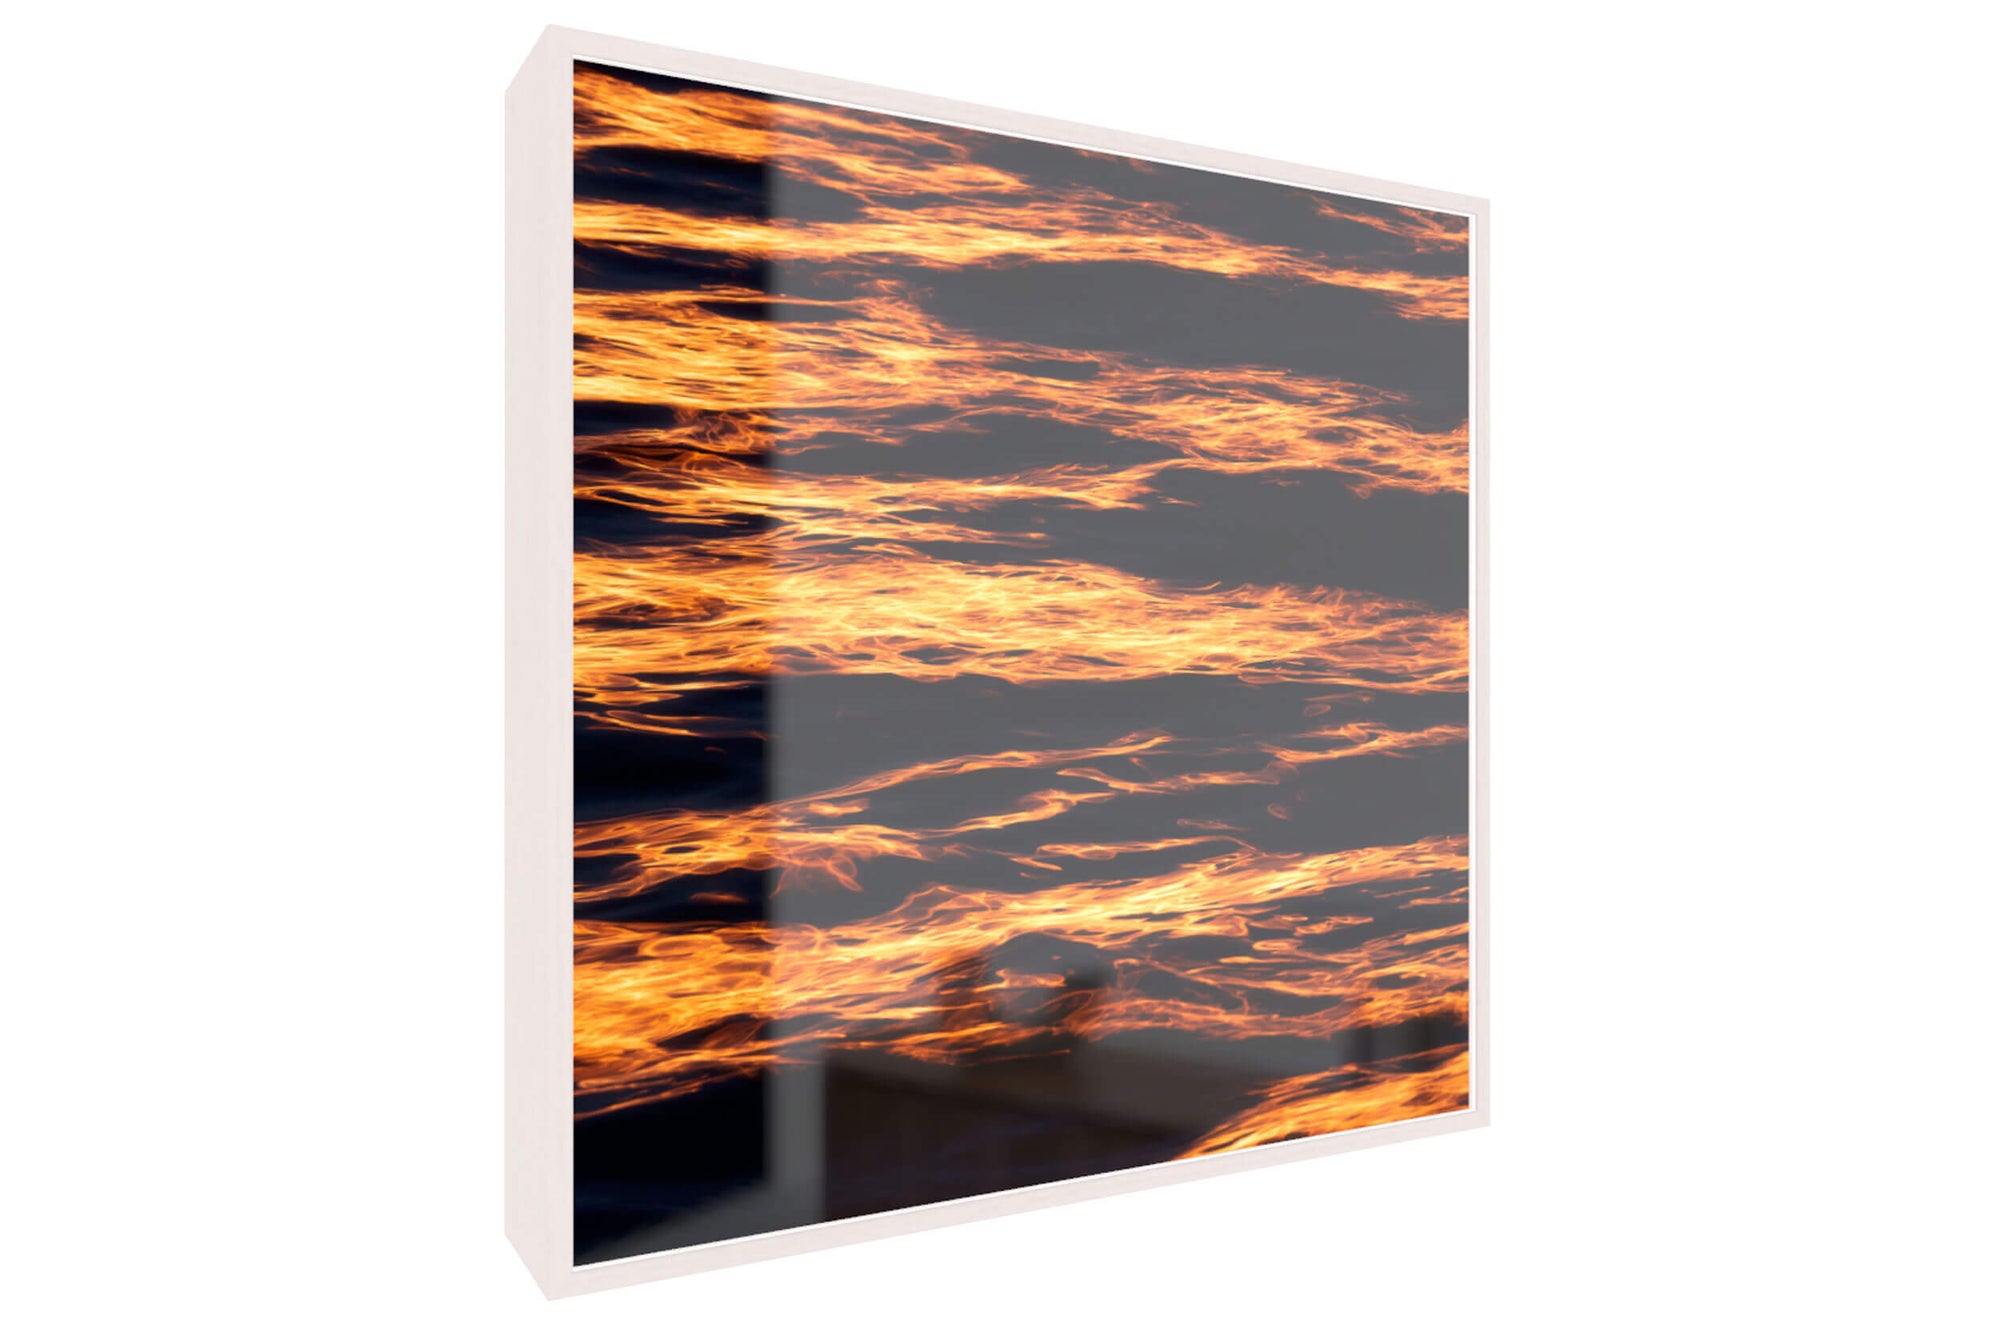 A framed Alki Beach sunset picture.